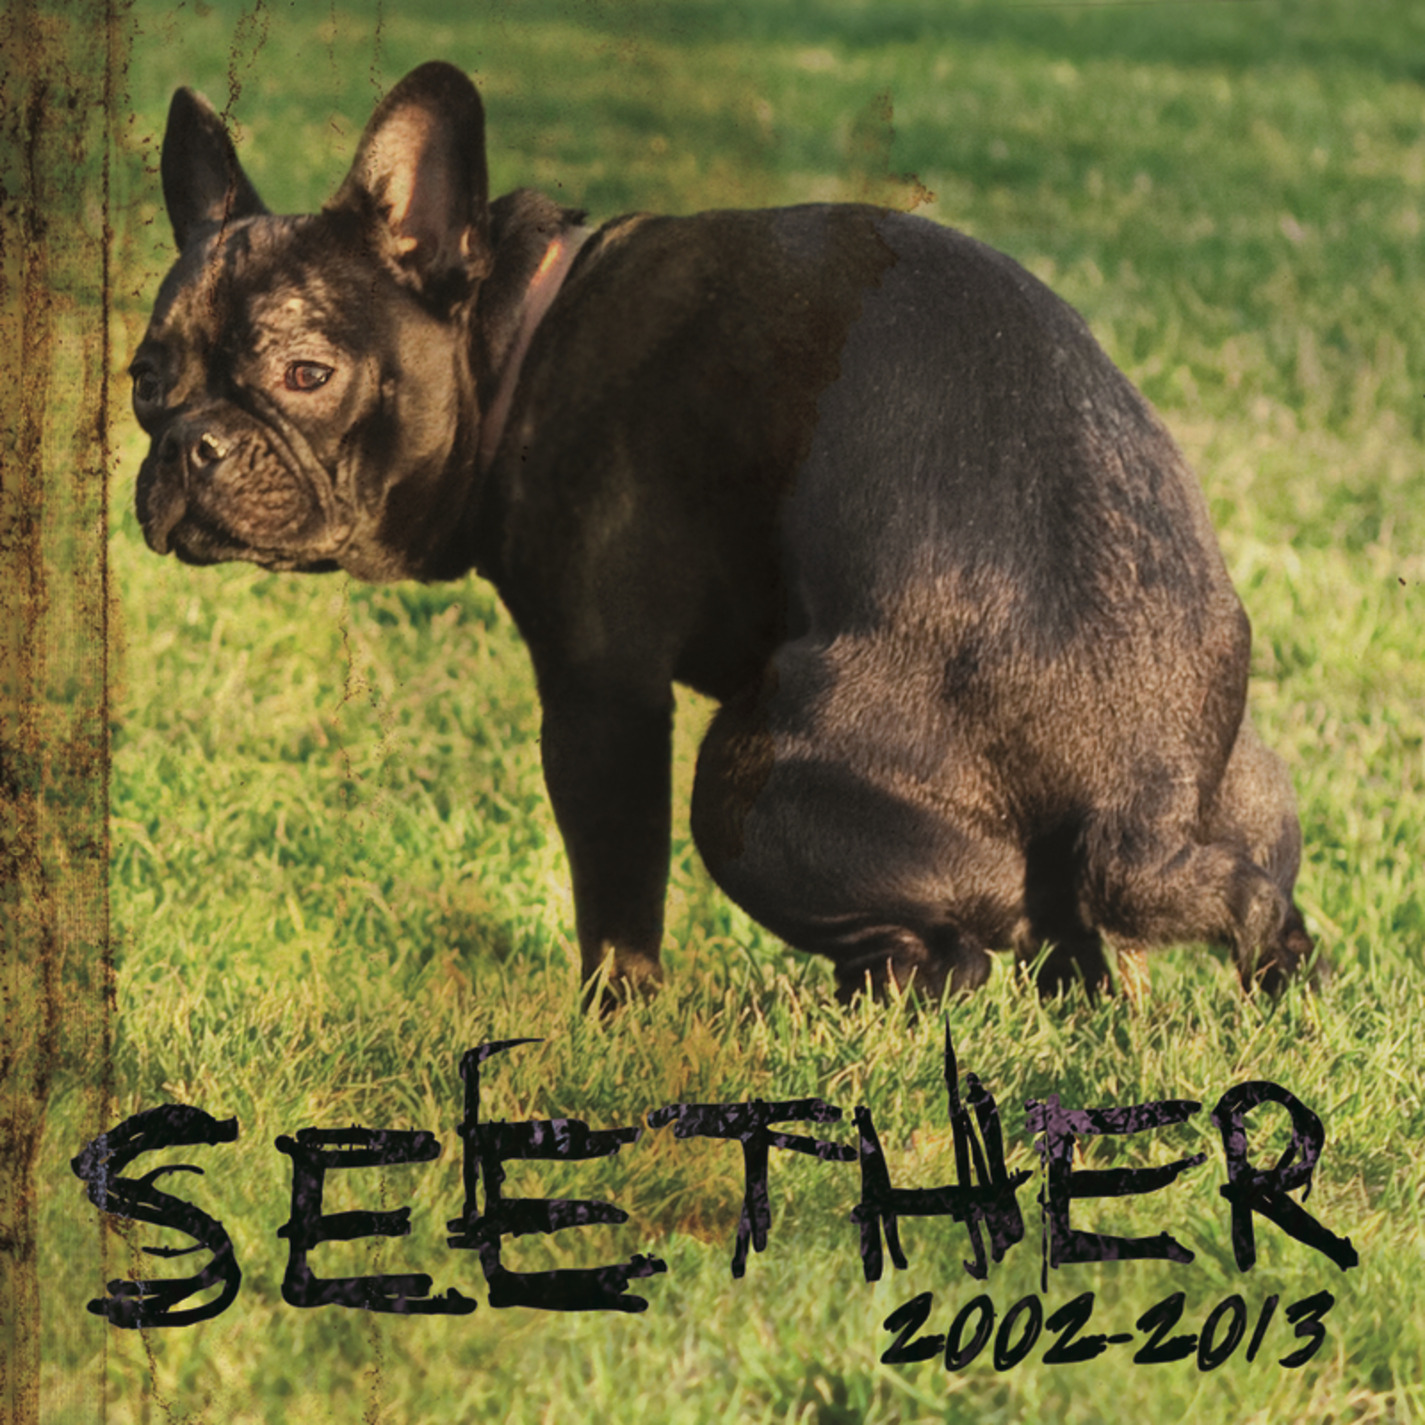 Seether - Like Suicide (Finding Beauty in Negative Spaces 2007)